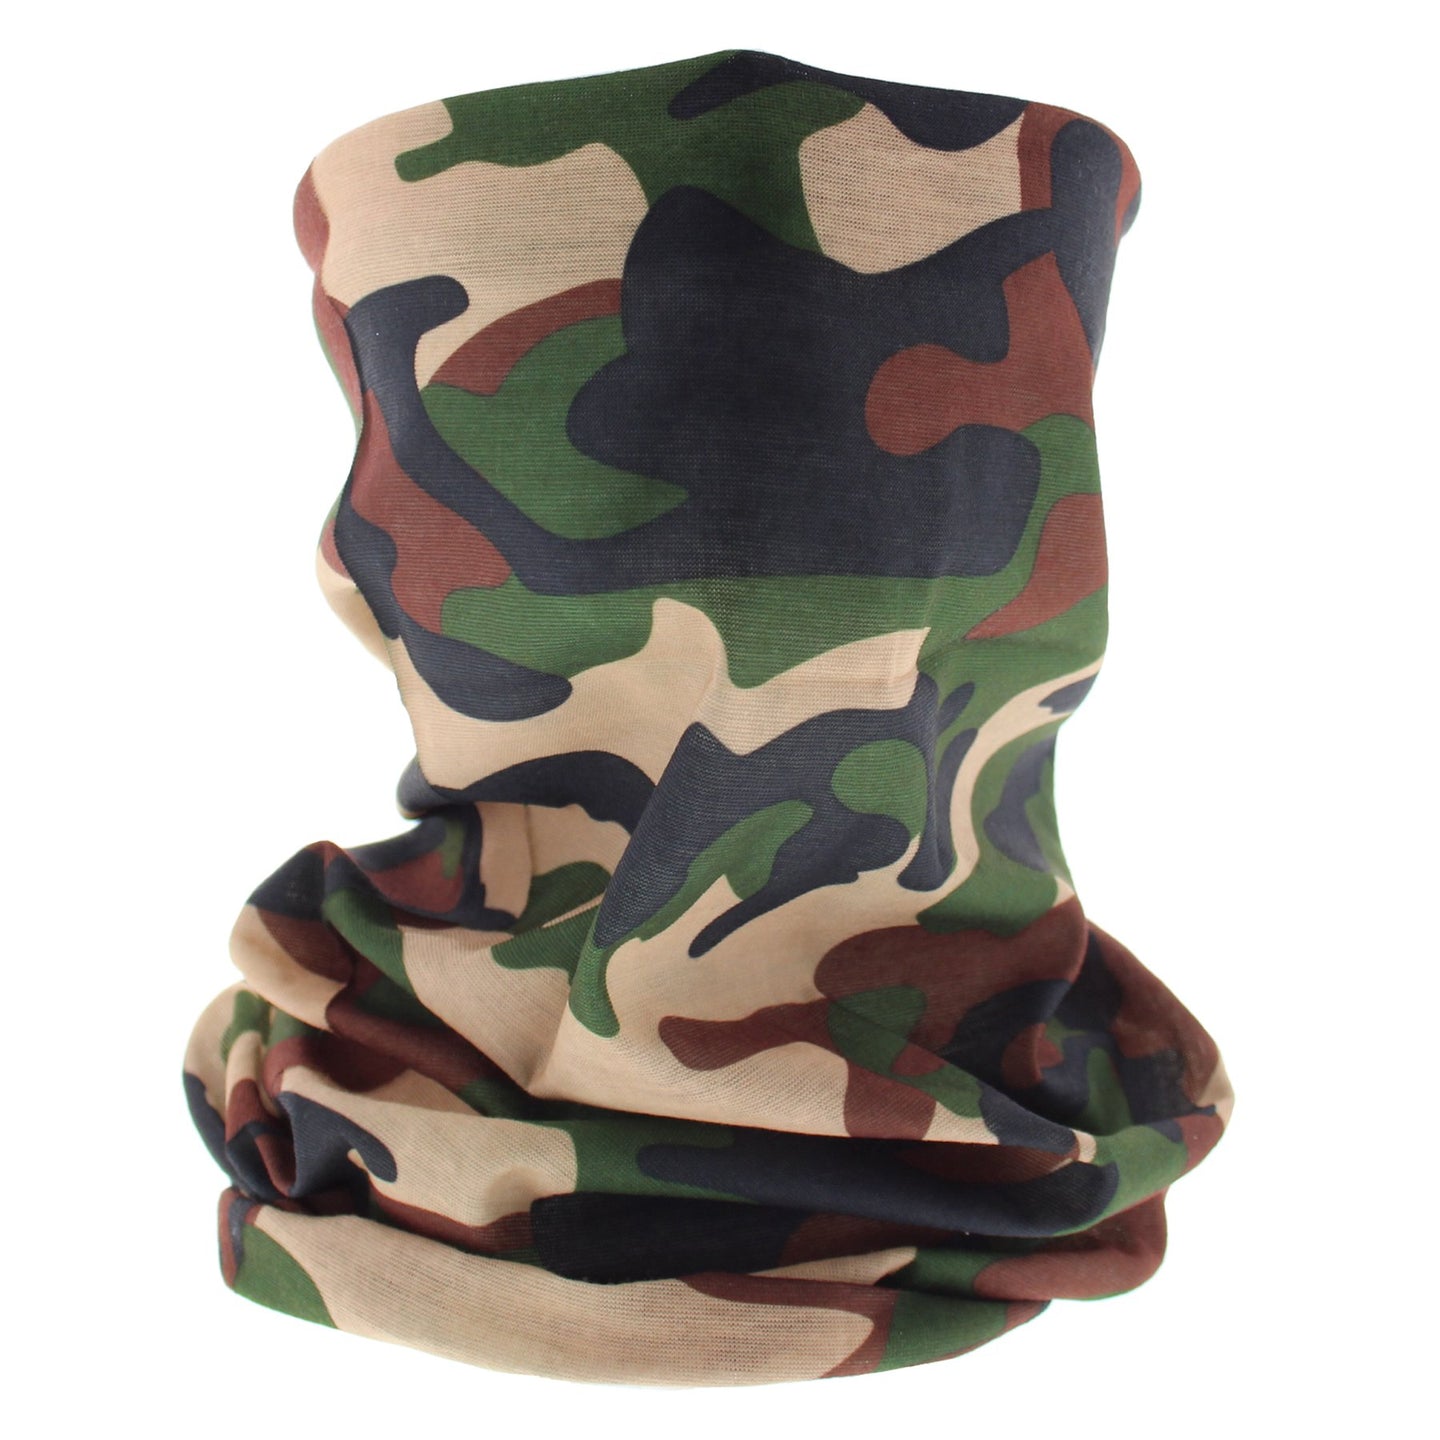 Camo Snood/Face Covering